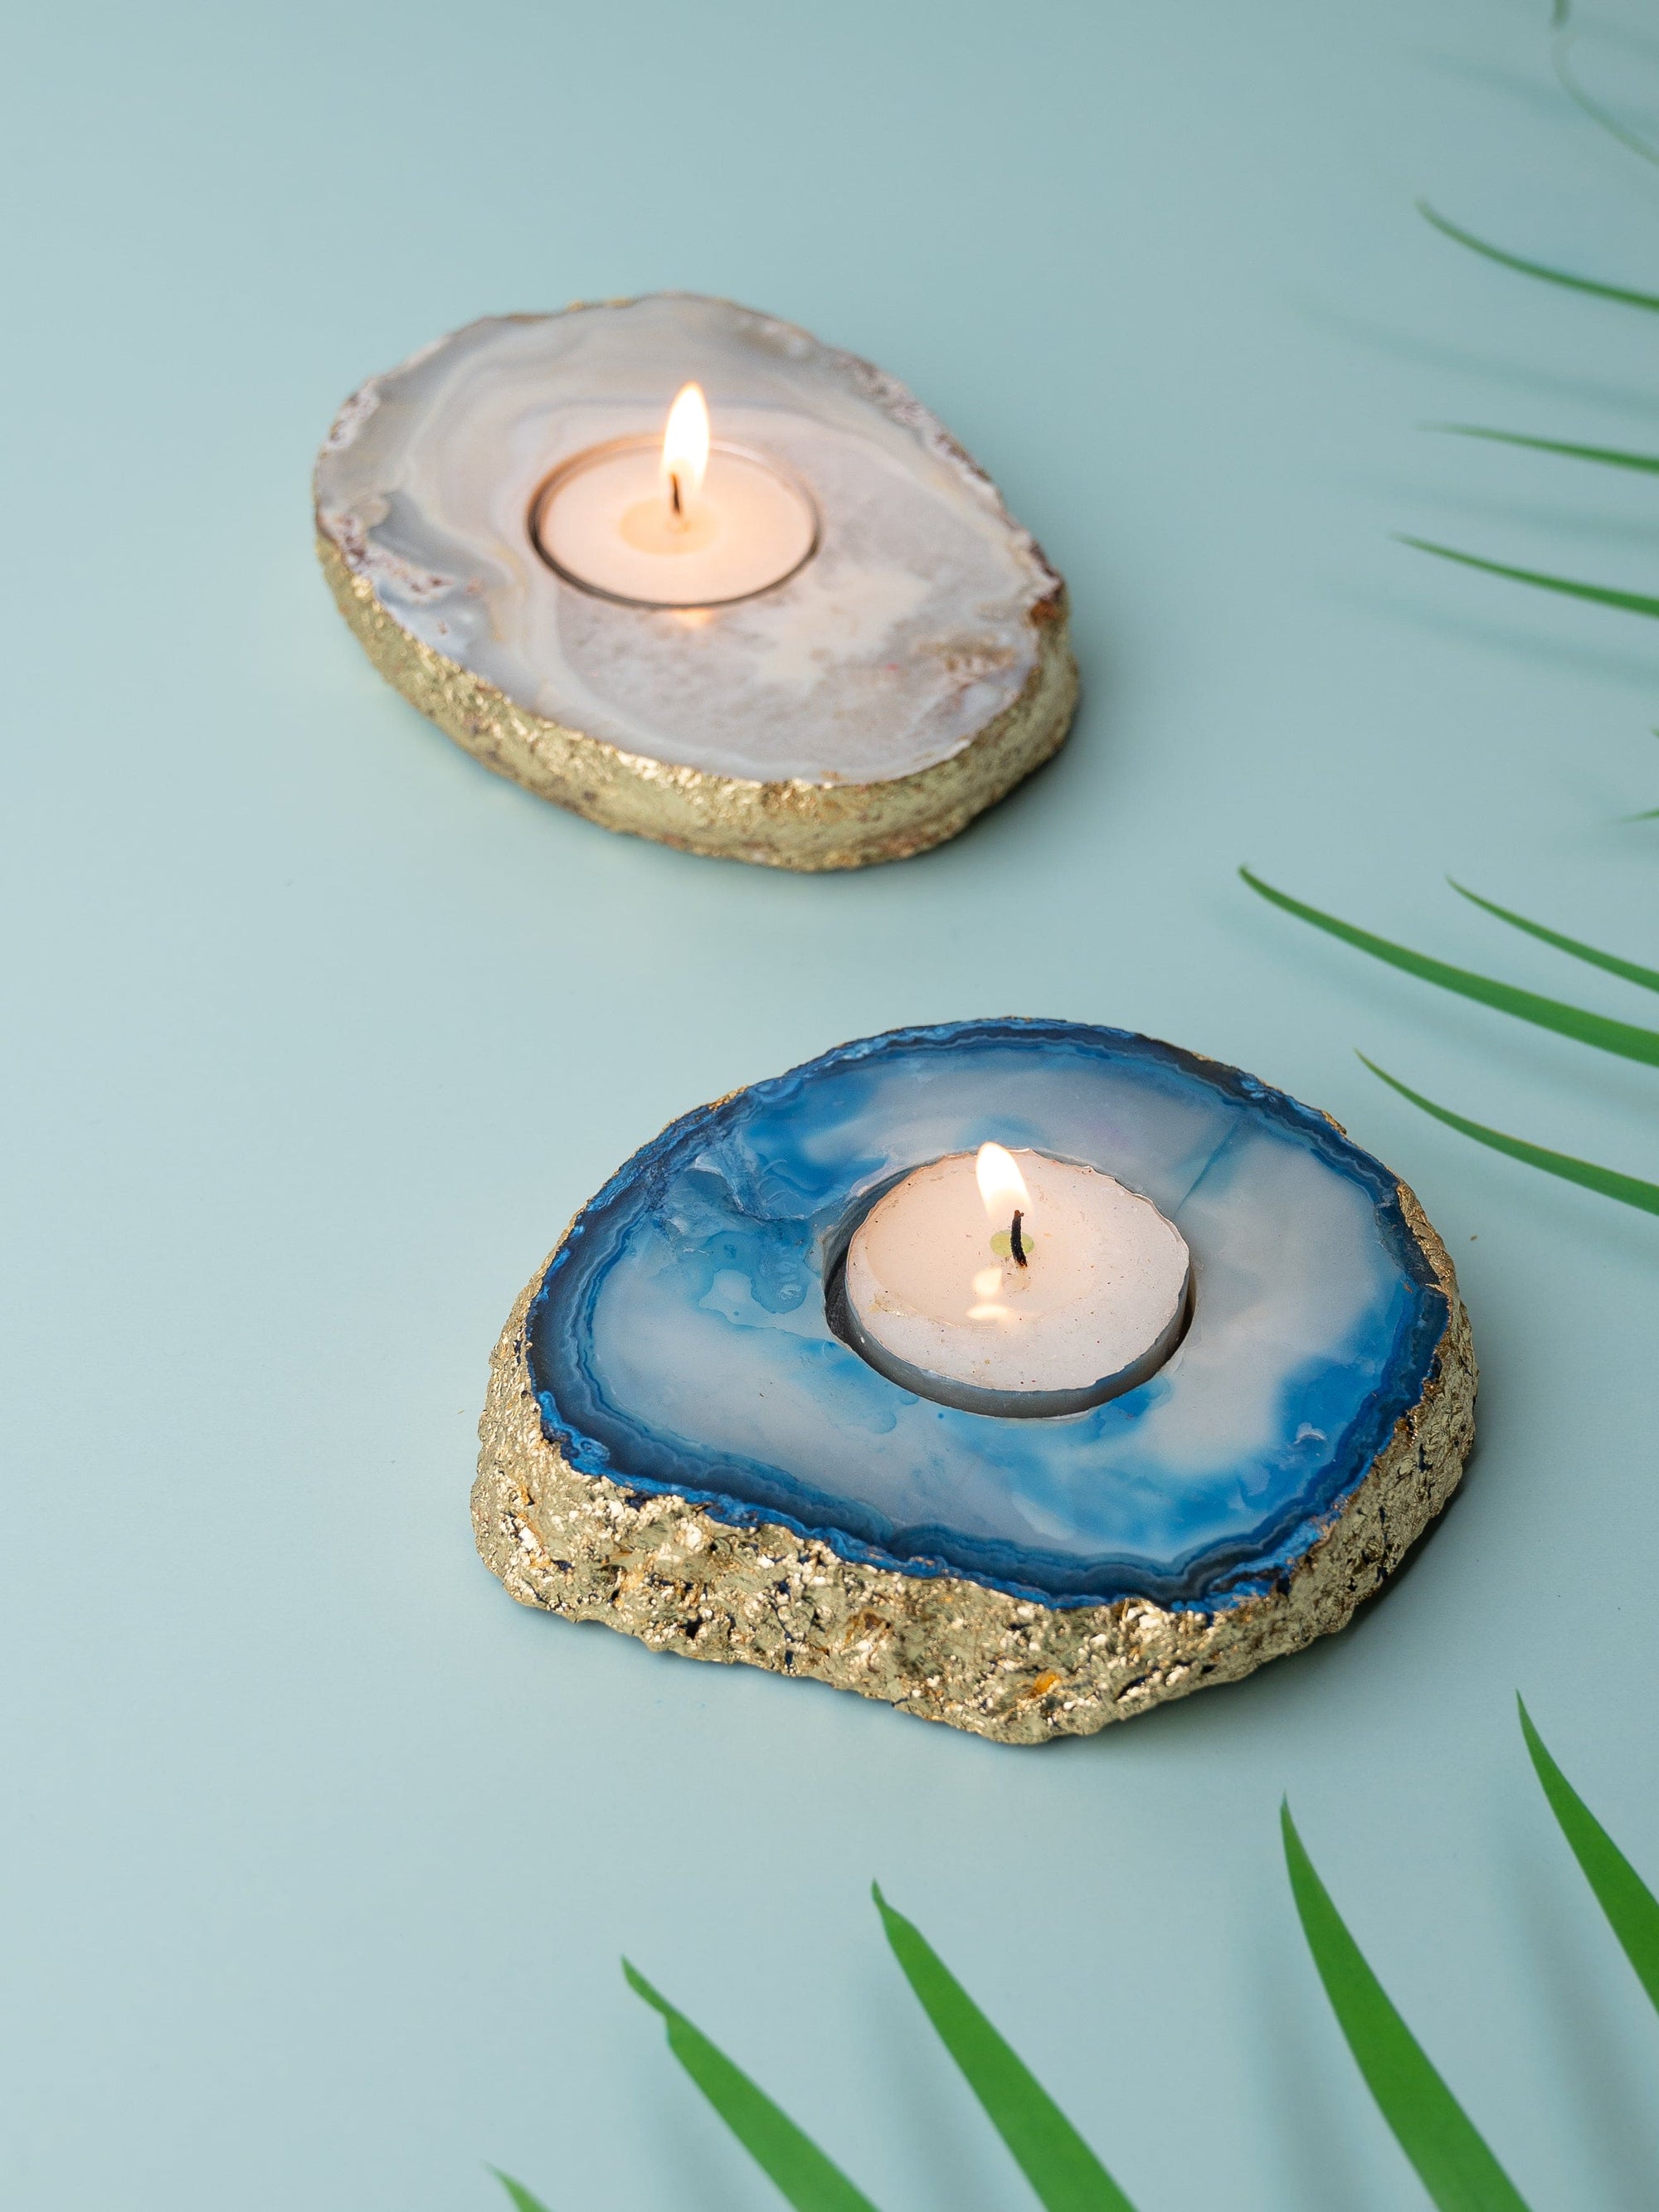 Set of 2 T Light Candle Holders Made in Colorful Agate Stone, Comes in a Gift Box